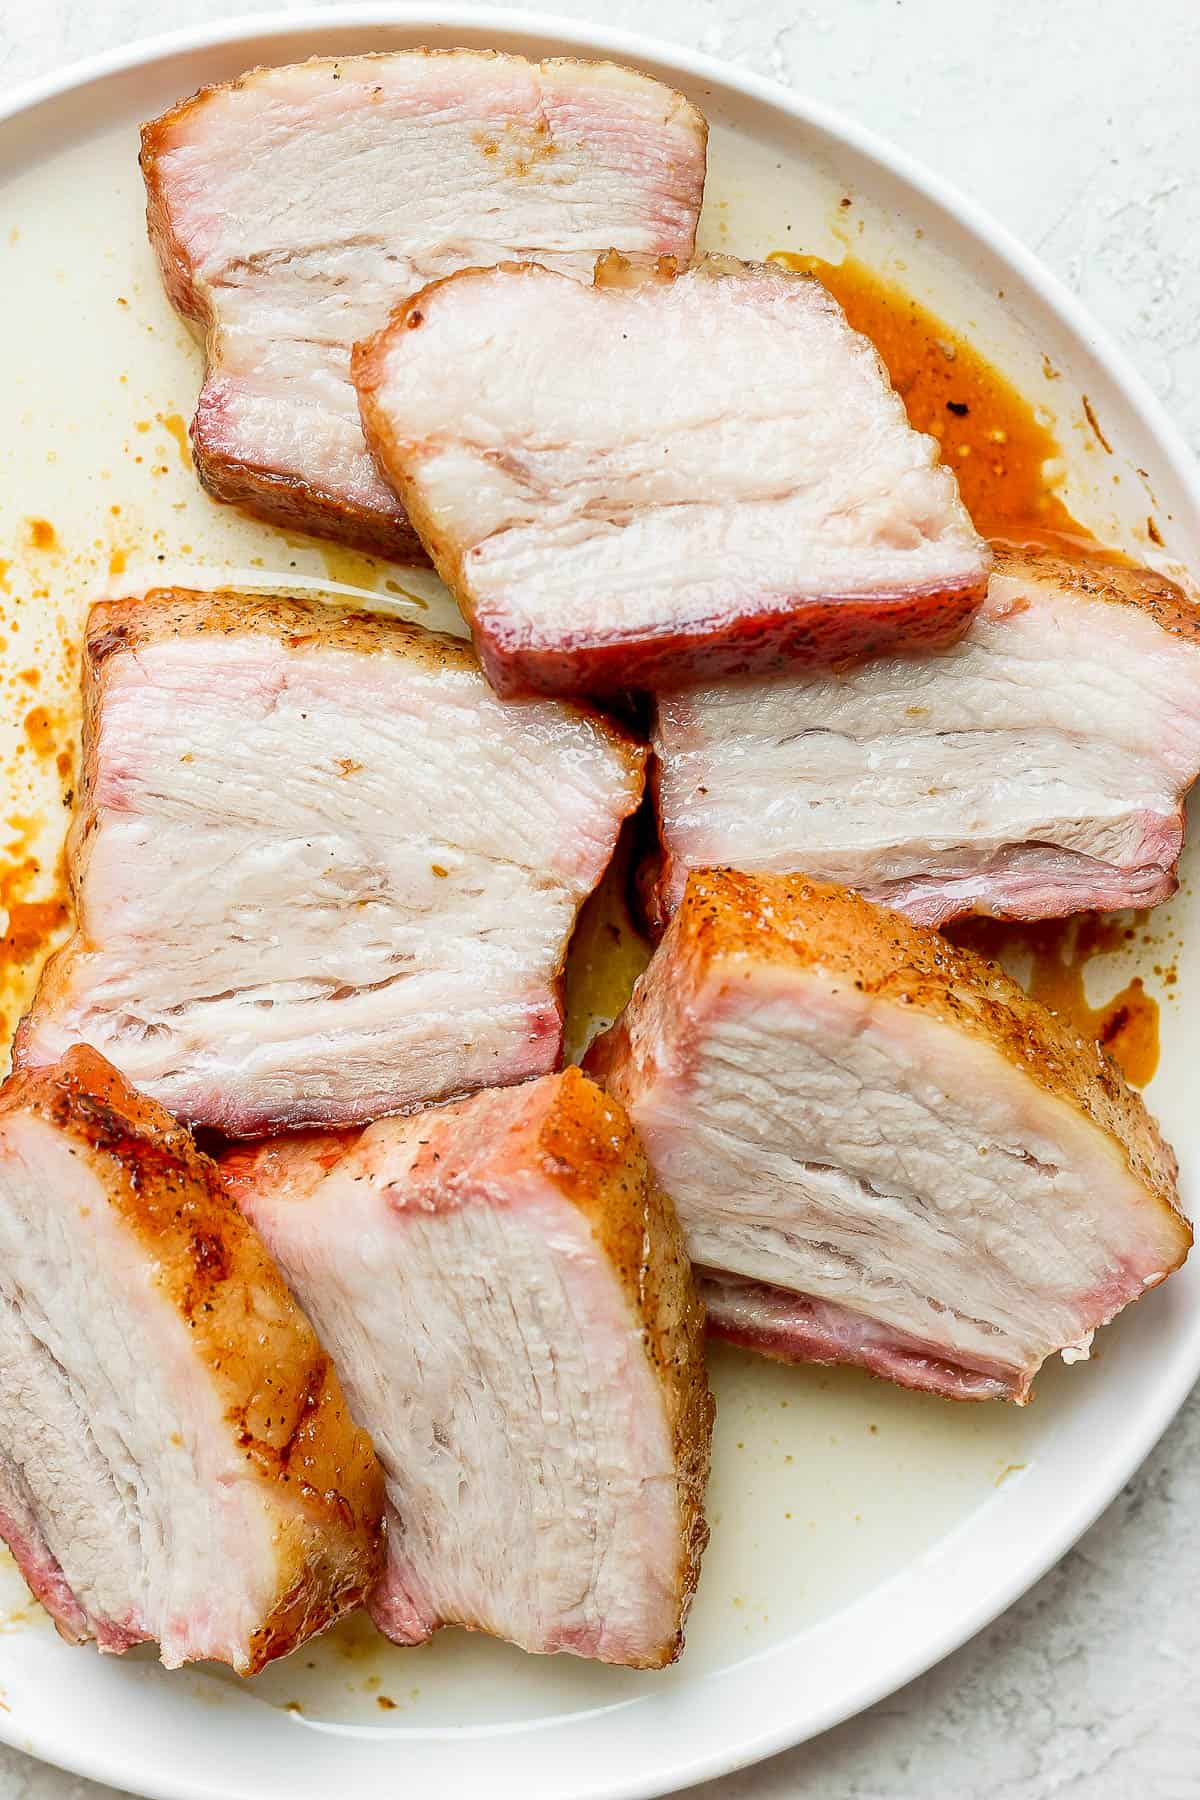 A plate of pork belly slices.